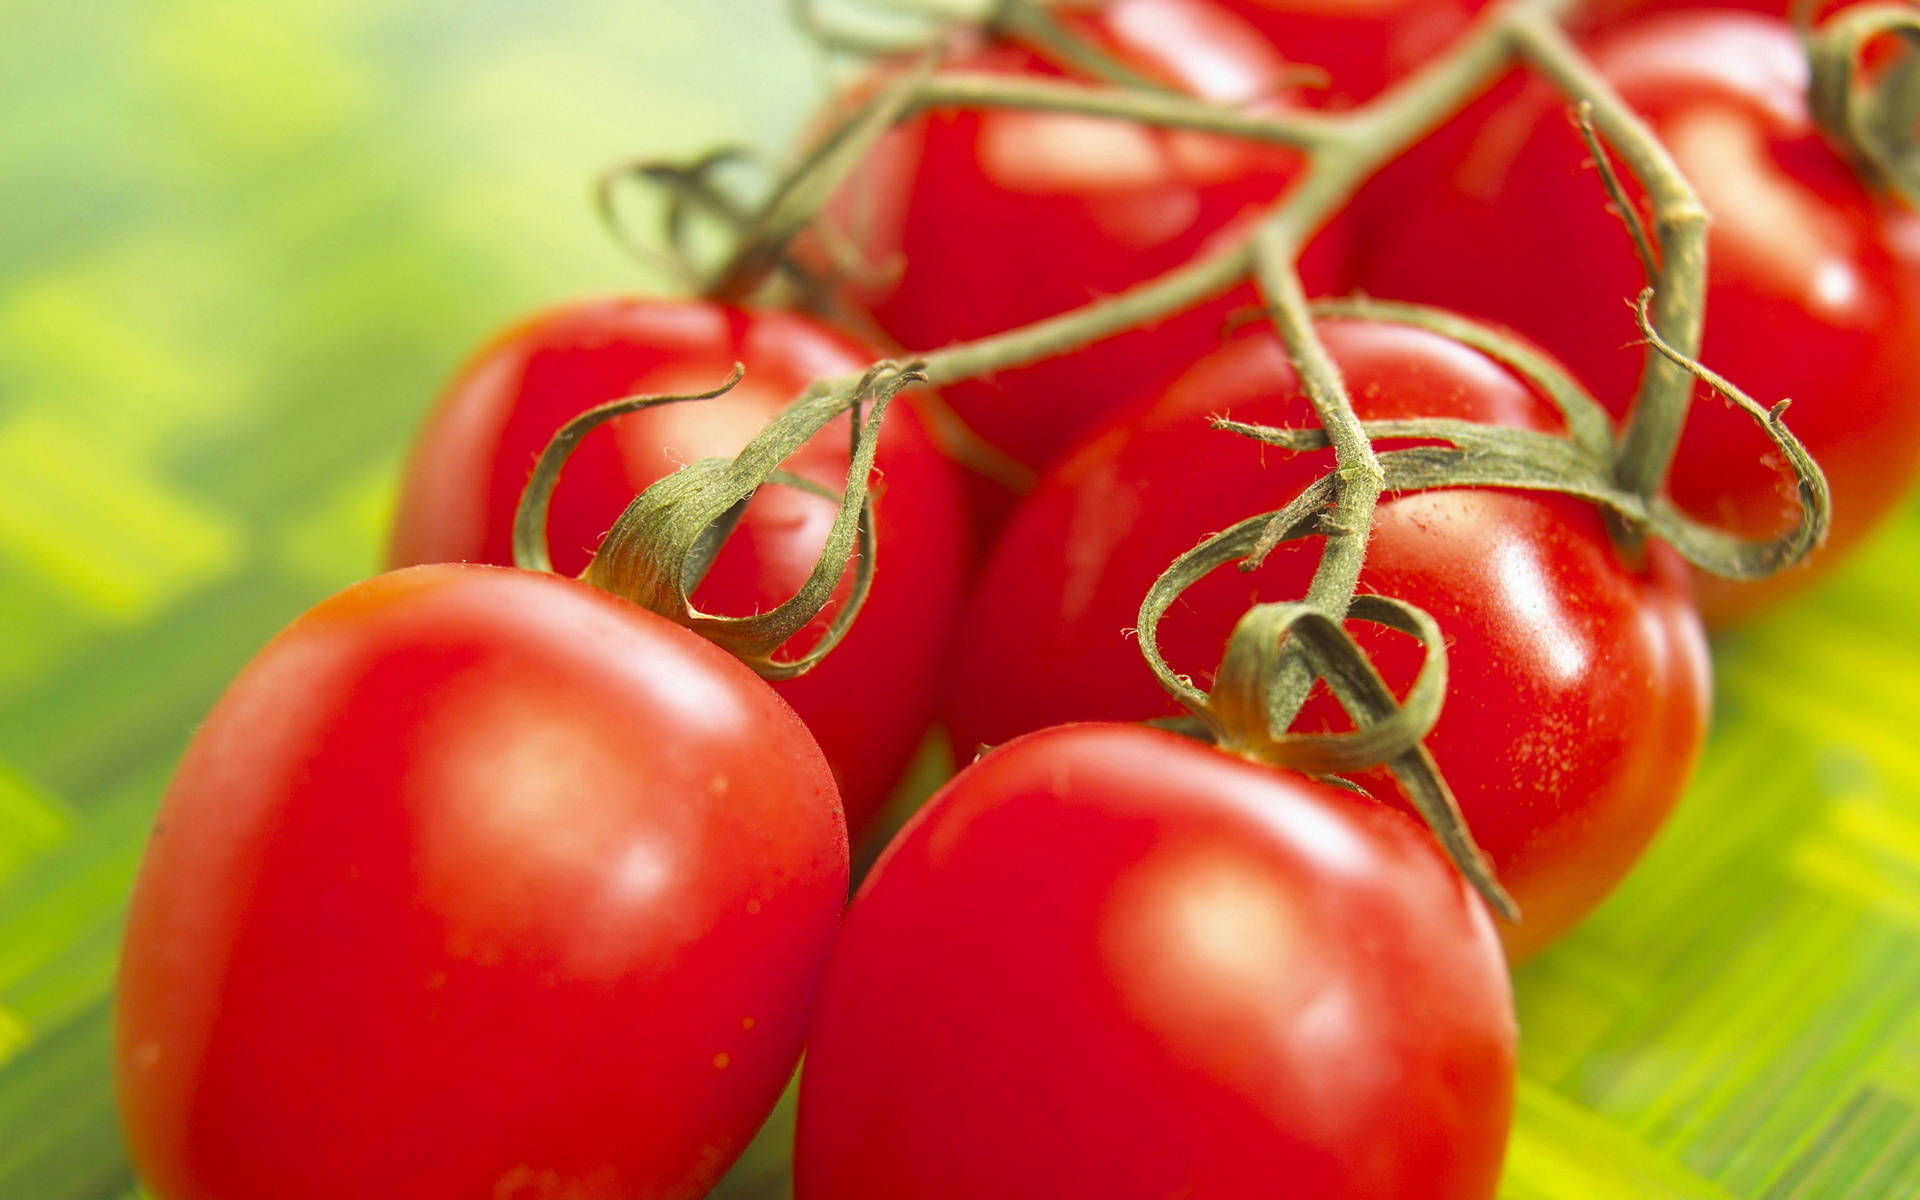 Shiny Clustered Red Tomato Fruits Wallpaper